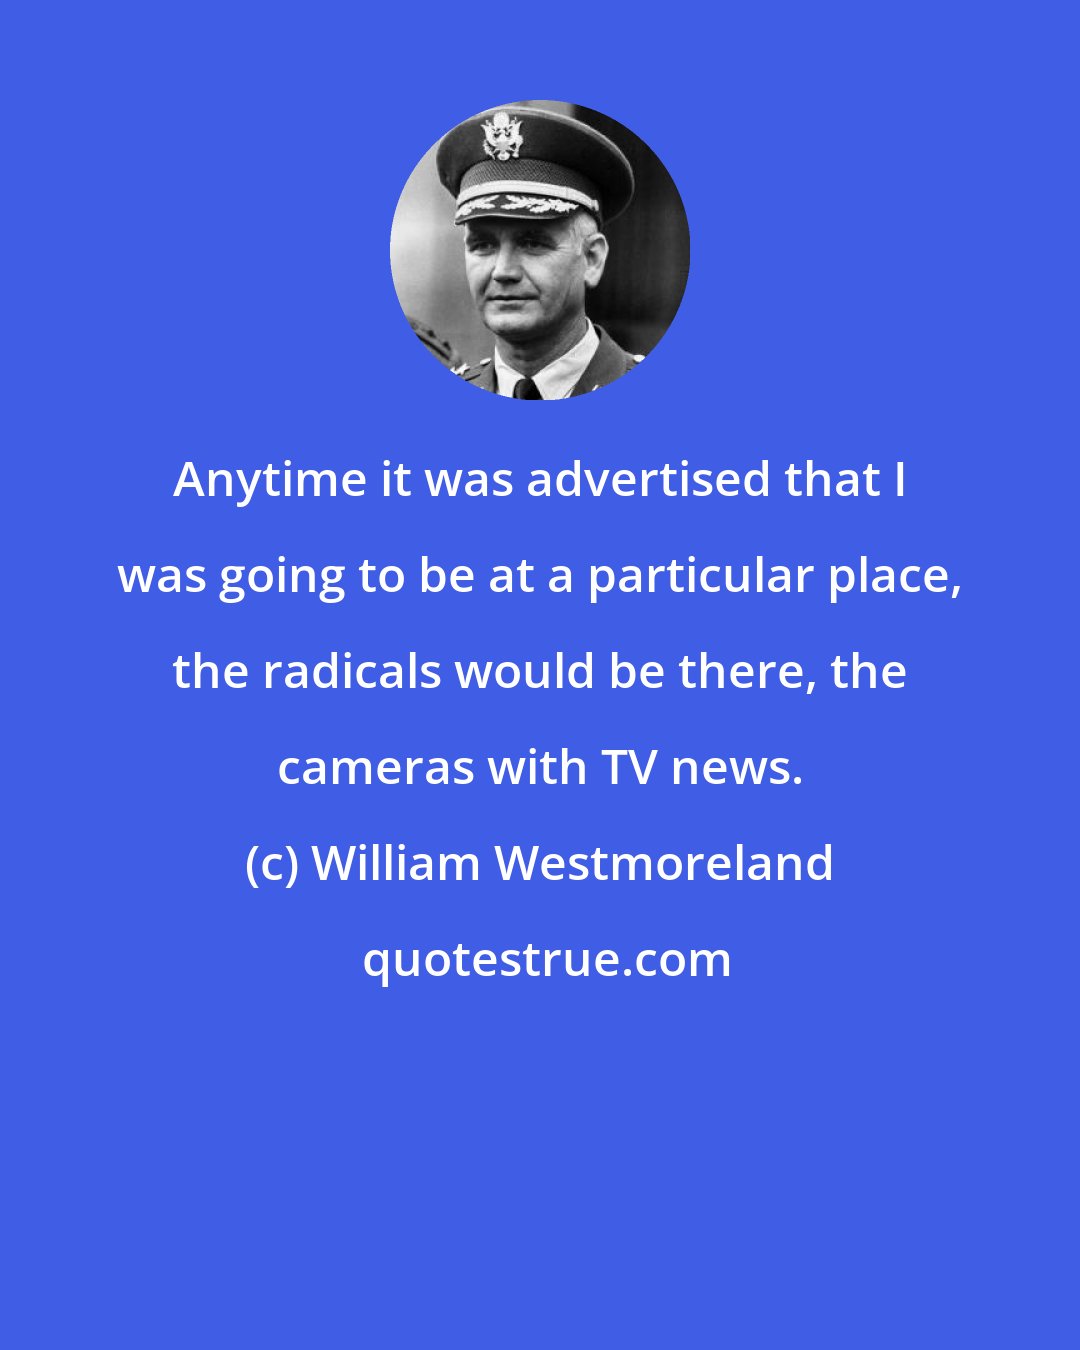 William Westmoreland: Anytime it was advertised that I was going to be at a particular place, the radicals would be there, the cameras with TV news.